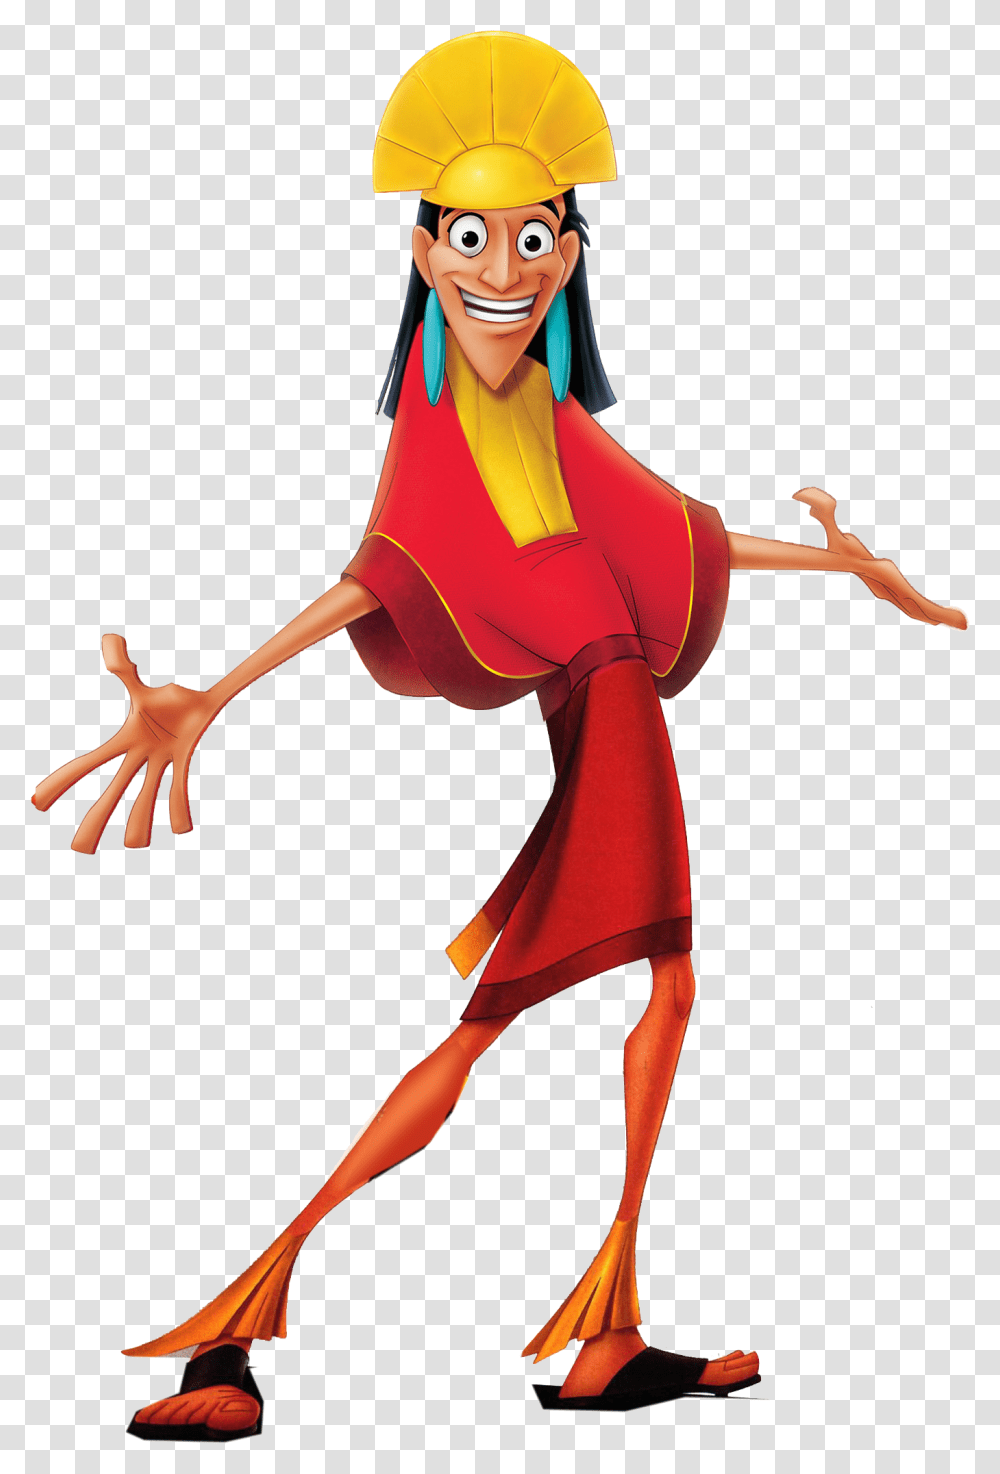 Kronk Kuzco The Groove Chanel Hq Kuzco New Groove, Person, Human, Leisure Activities, Costume Transparent Png